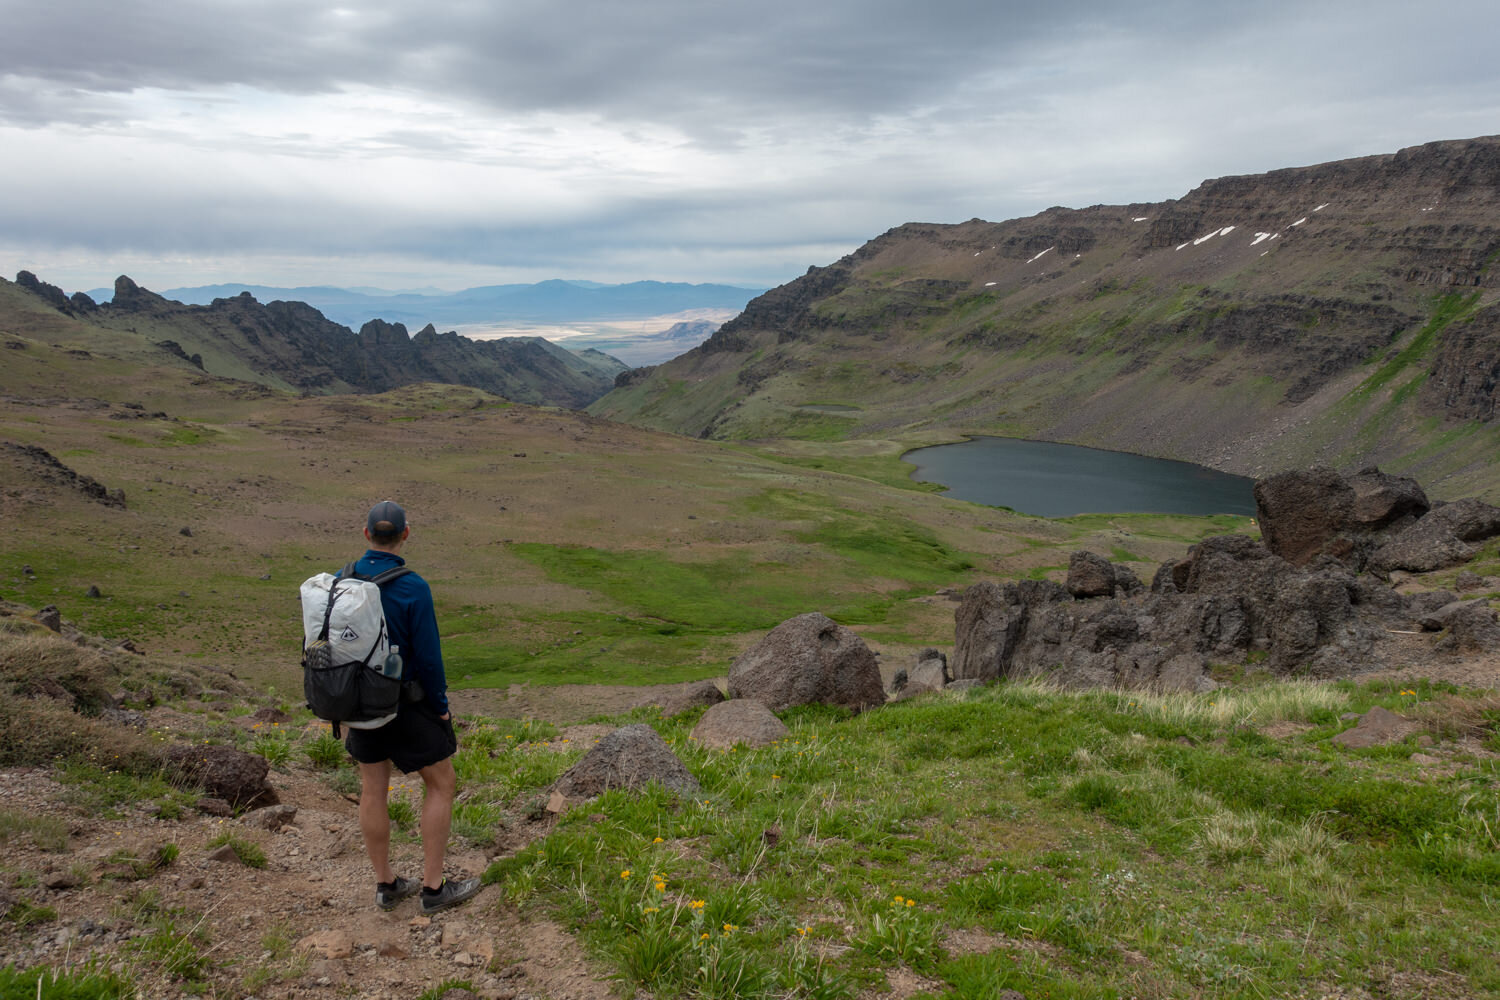 Wearing the Saucony Peregrines on a backpacking trip around Steens Mountain